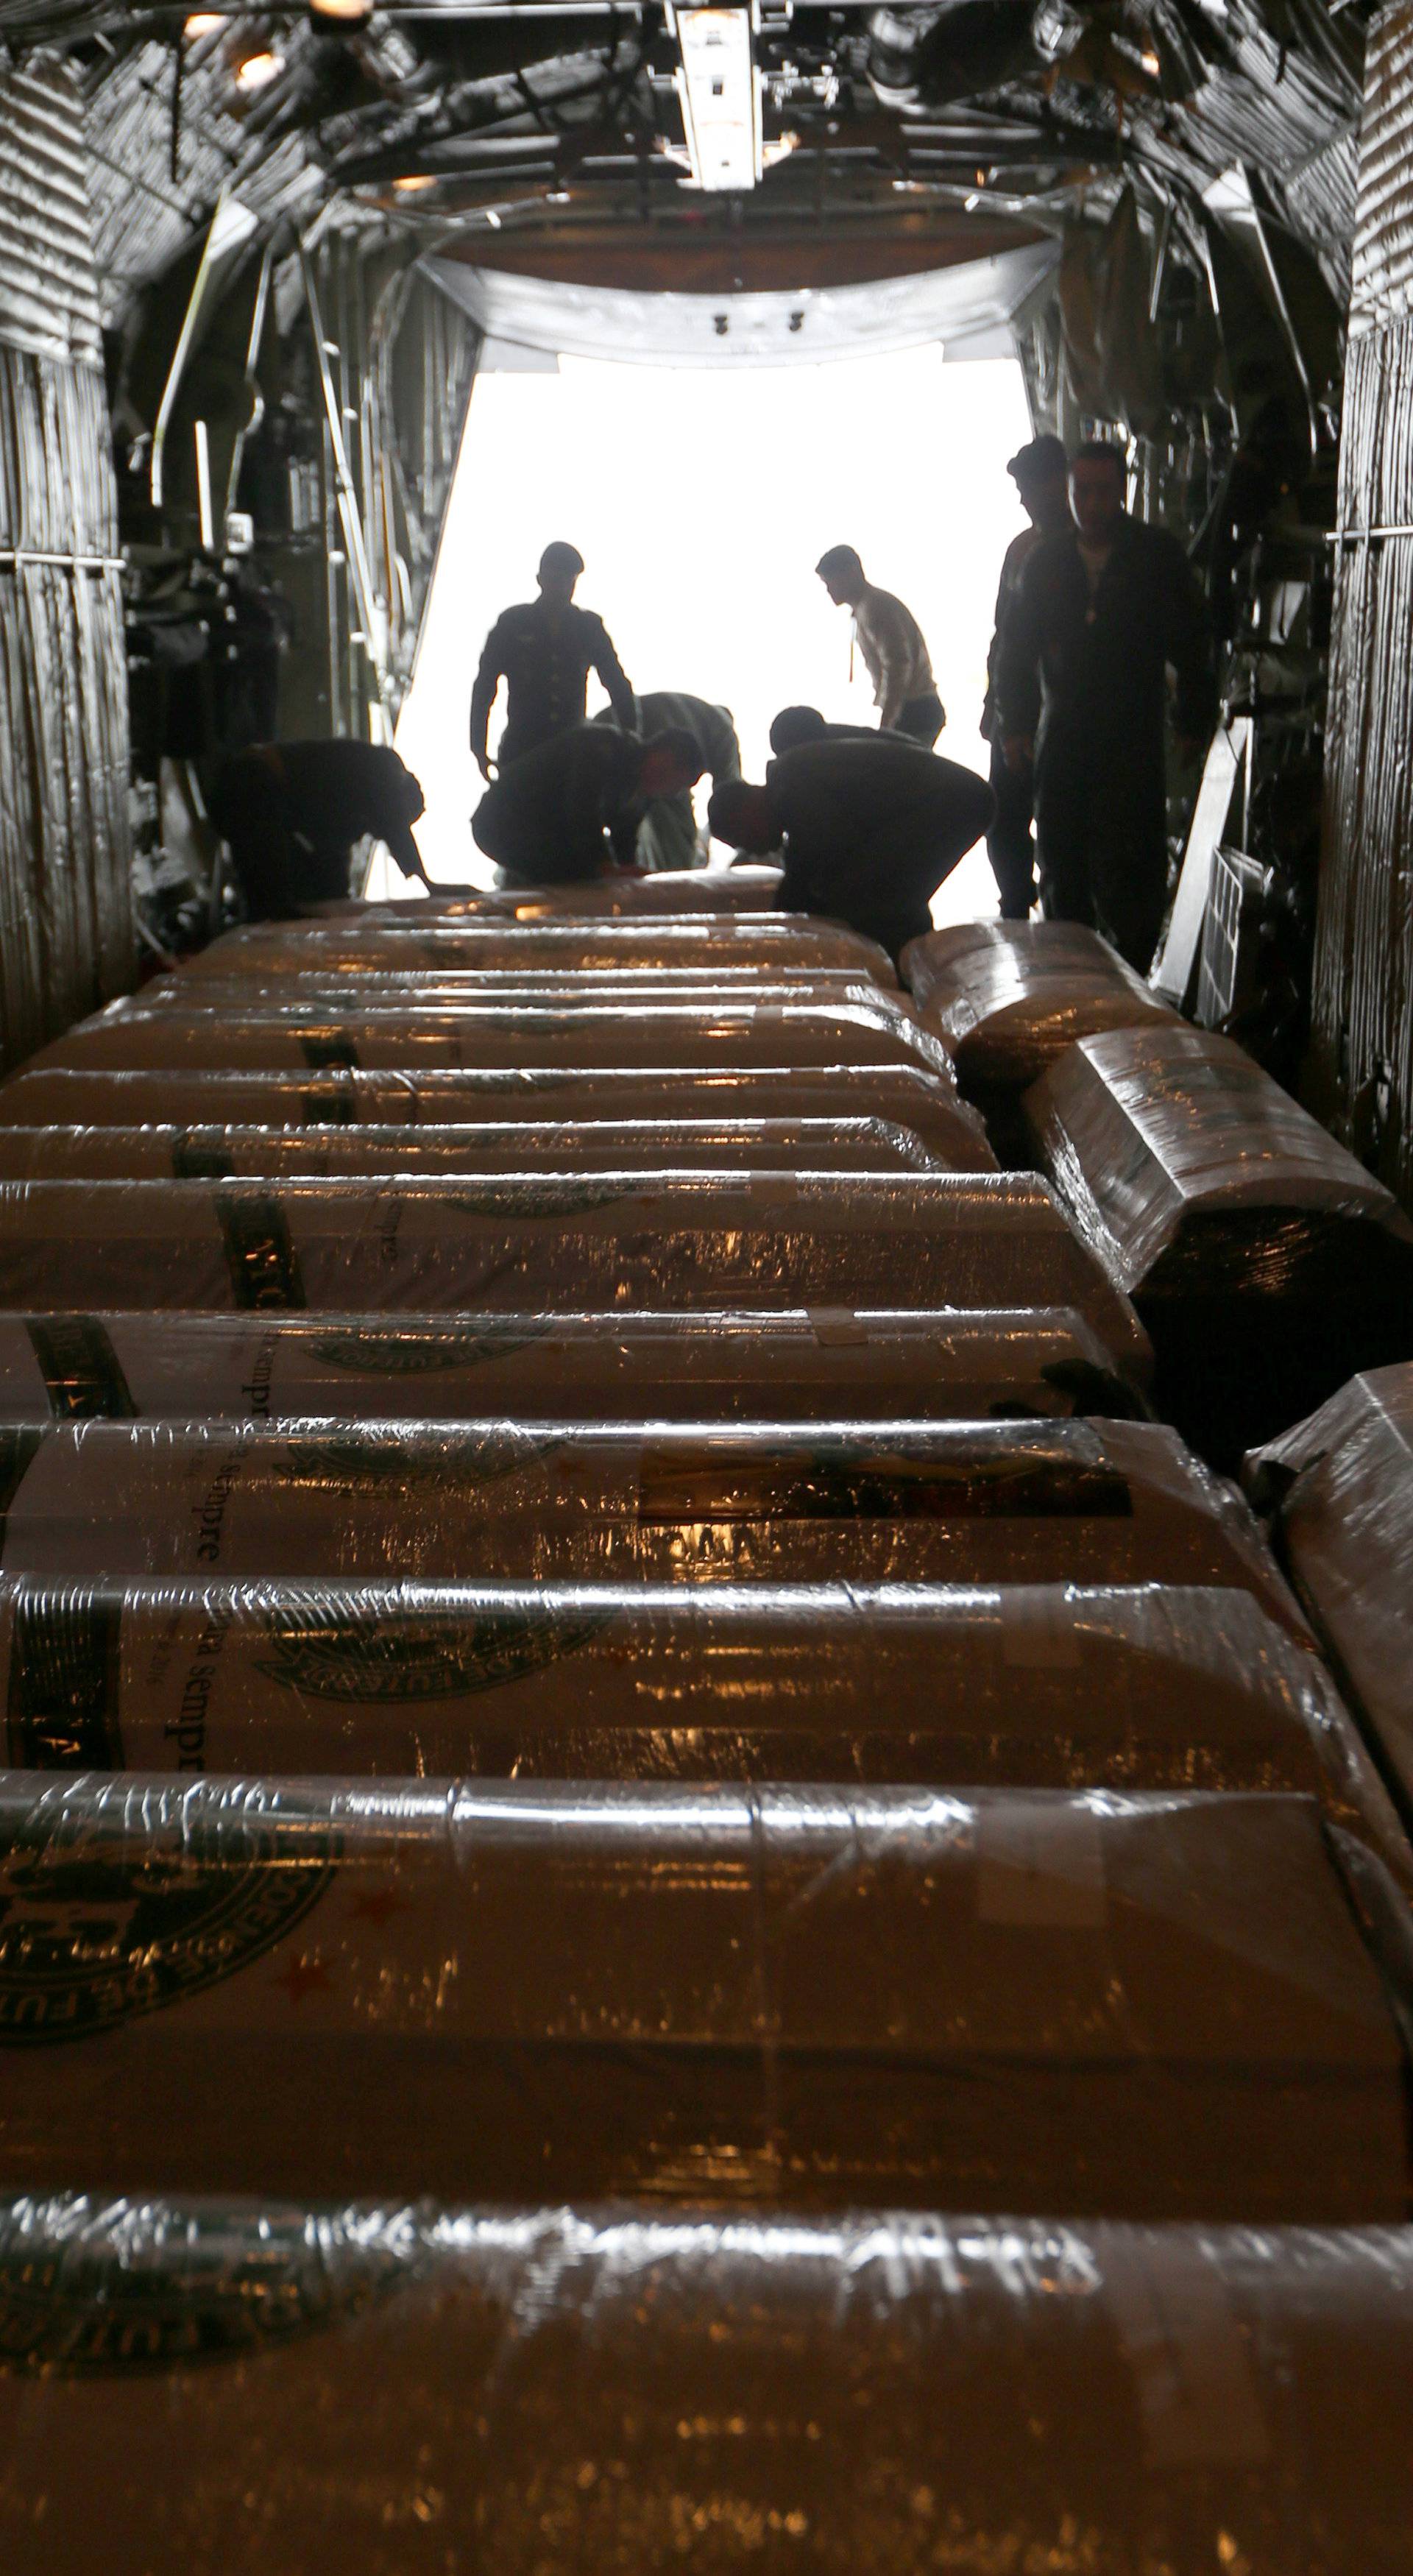 Coffins cointaining the mortal remains of victims of the plane crash in Colombia are seen inside the plane after arriving in Chapeco